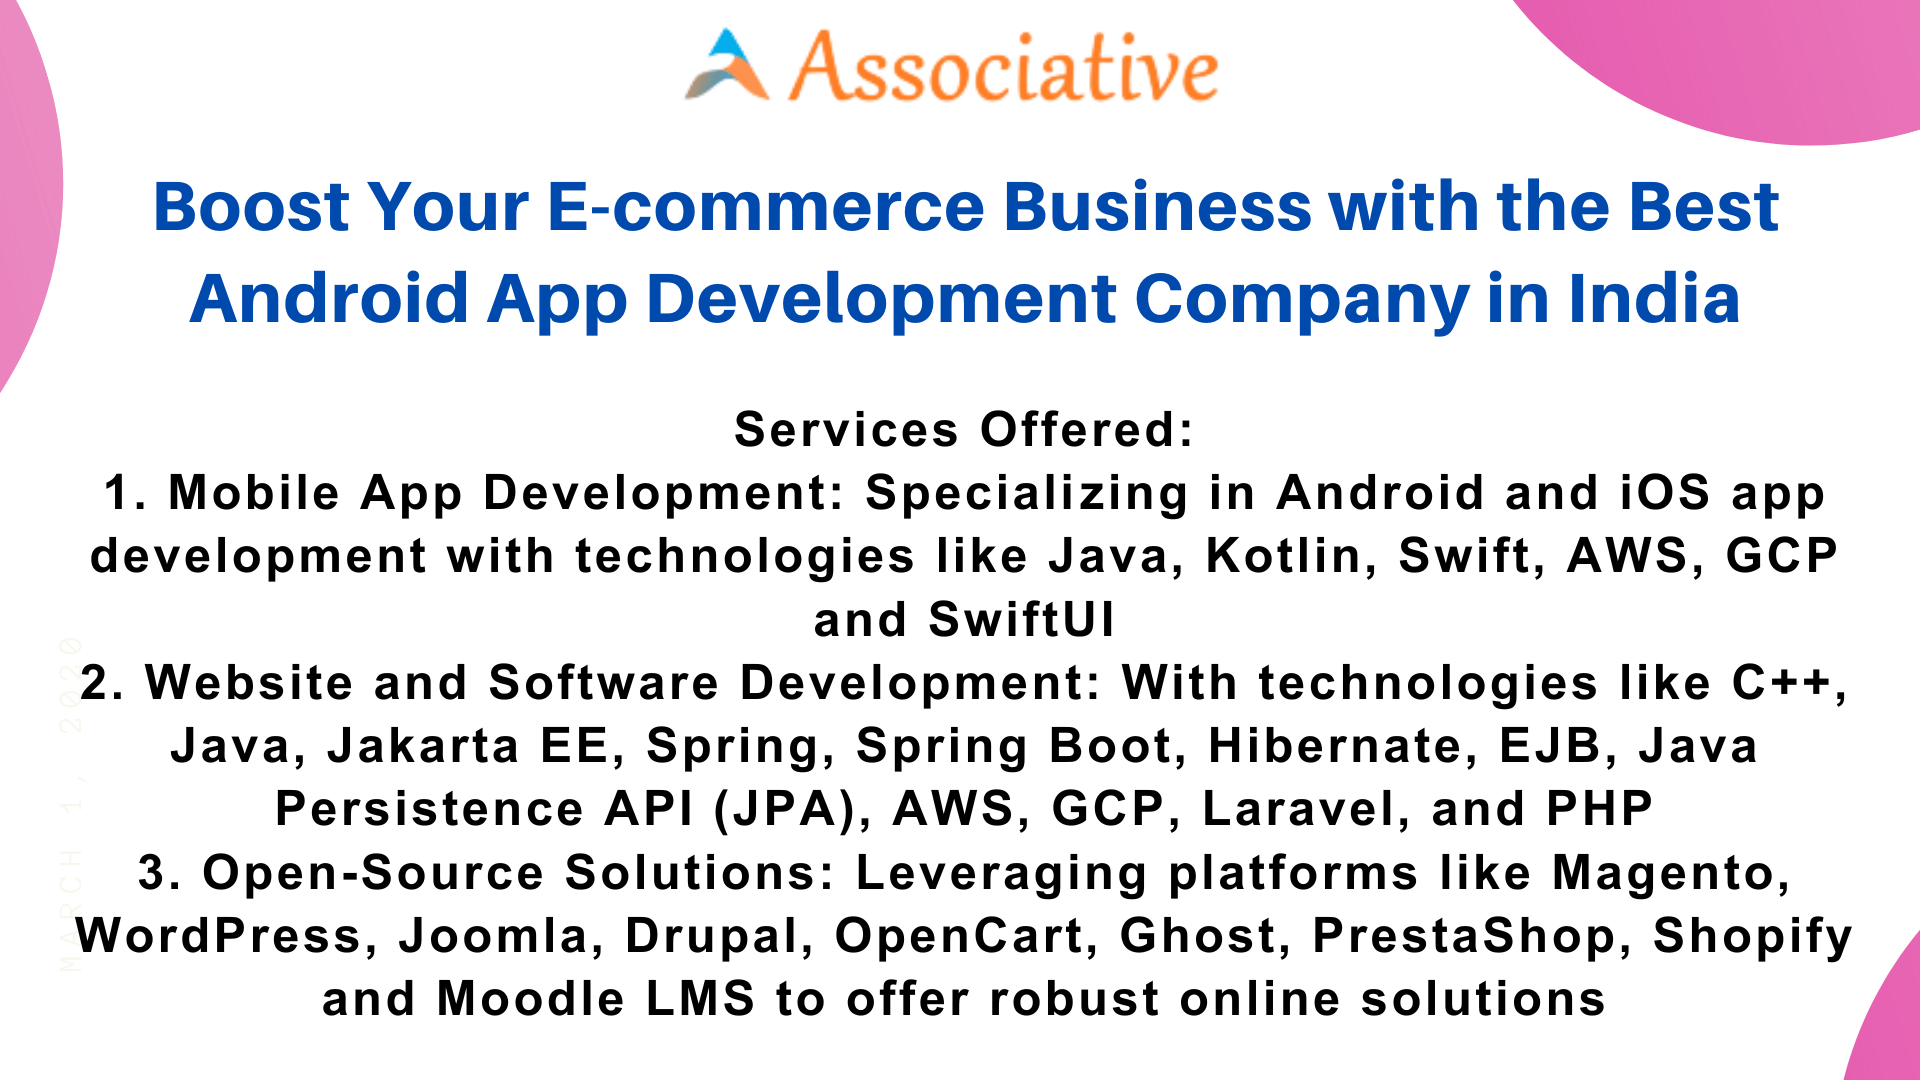 Boost Your E-commerce Business with the Best Android App Development Company in India